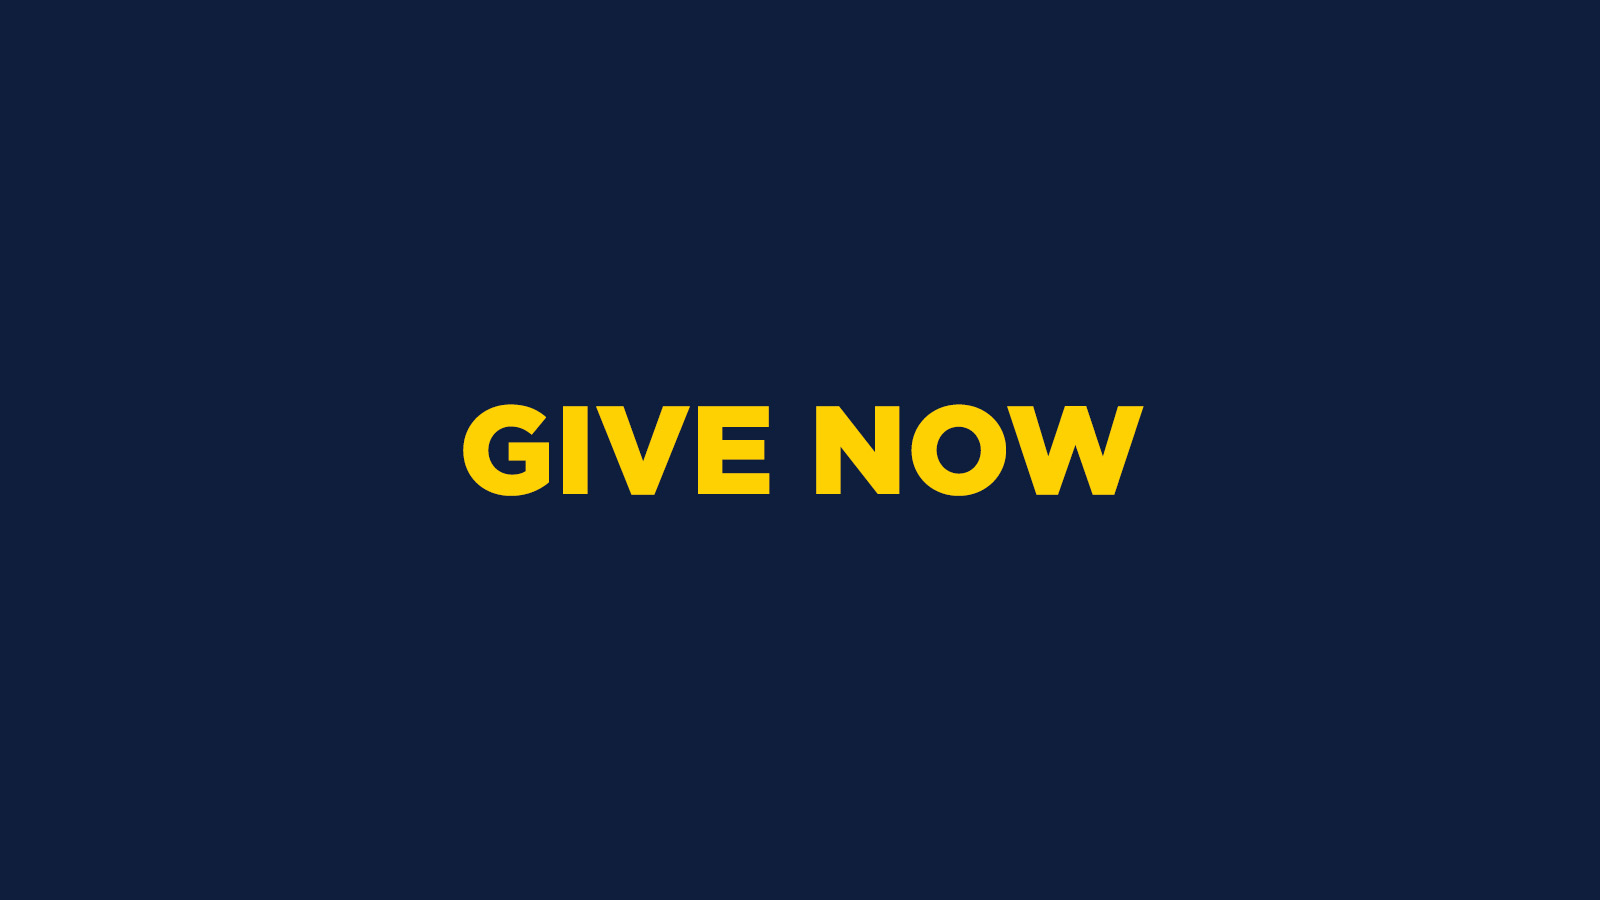 GIVE NOW